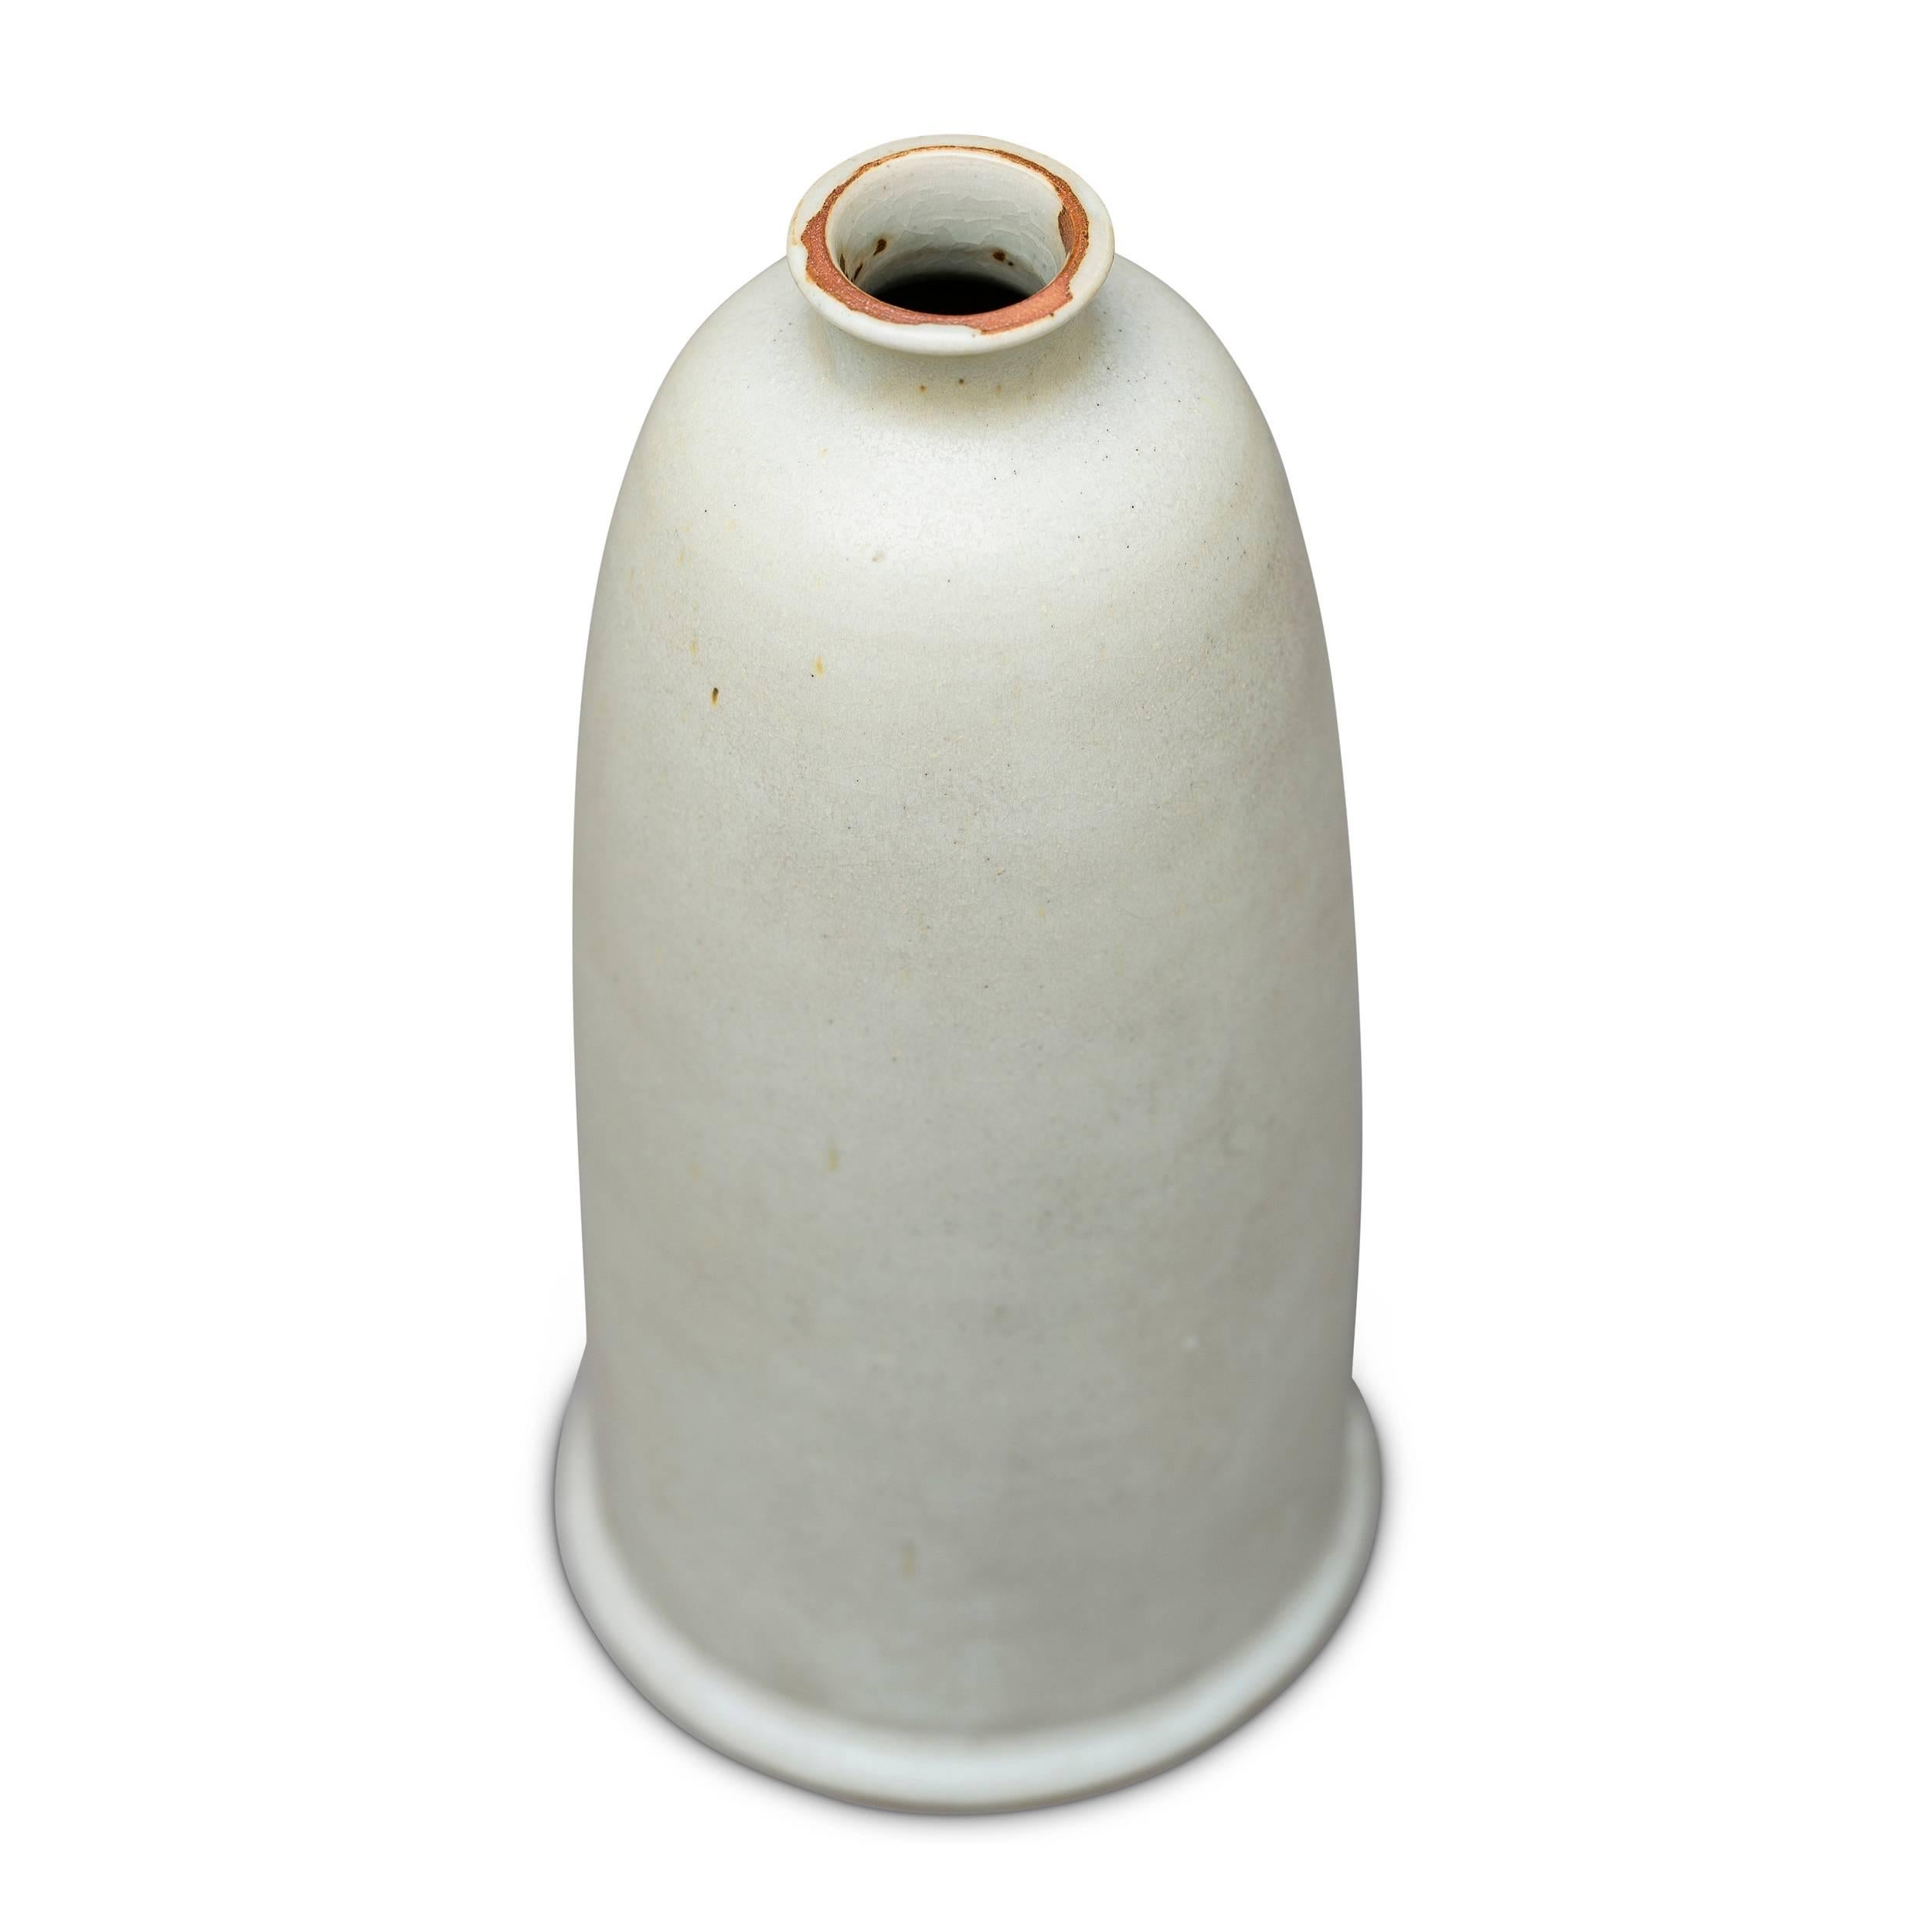 Fantastic Swedish Functionalist / Funkis able lamp from the iconic Tobo studio of Erich and Ingrid Triller, its base a wonderful early example of organic modeling in the form of a parabolic arch pedestal with short neck, hand-turned earthenware with